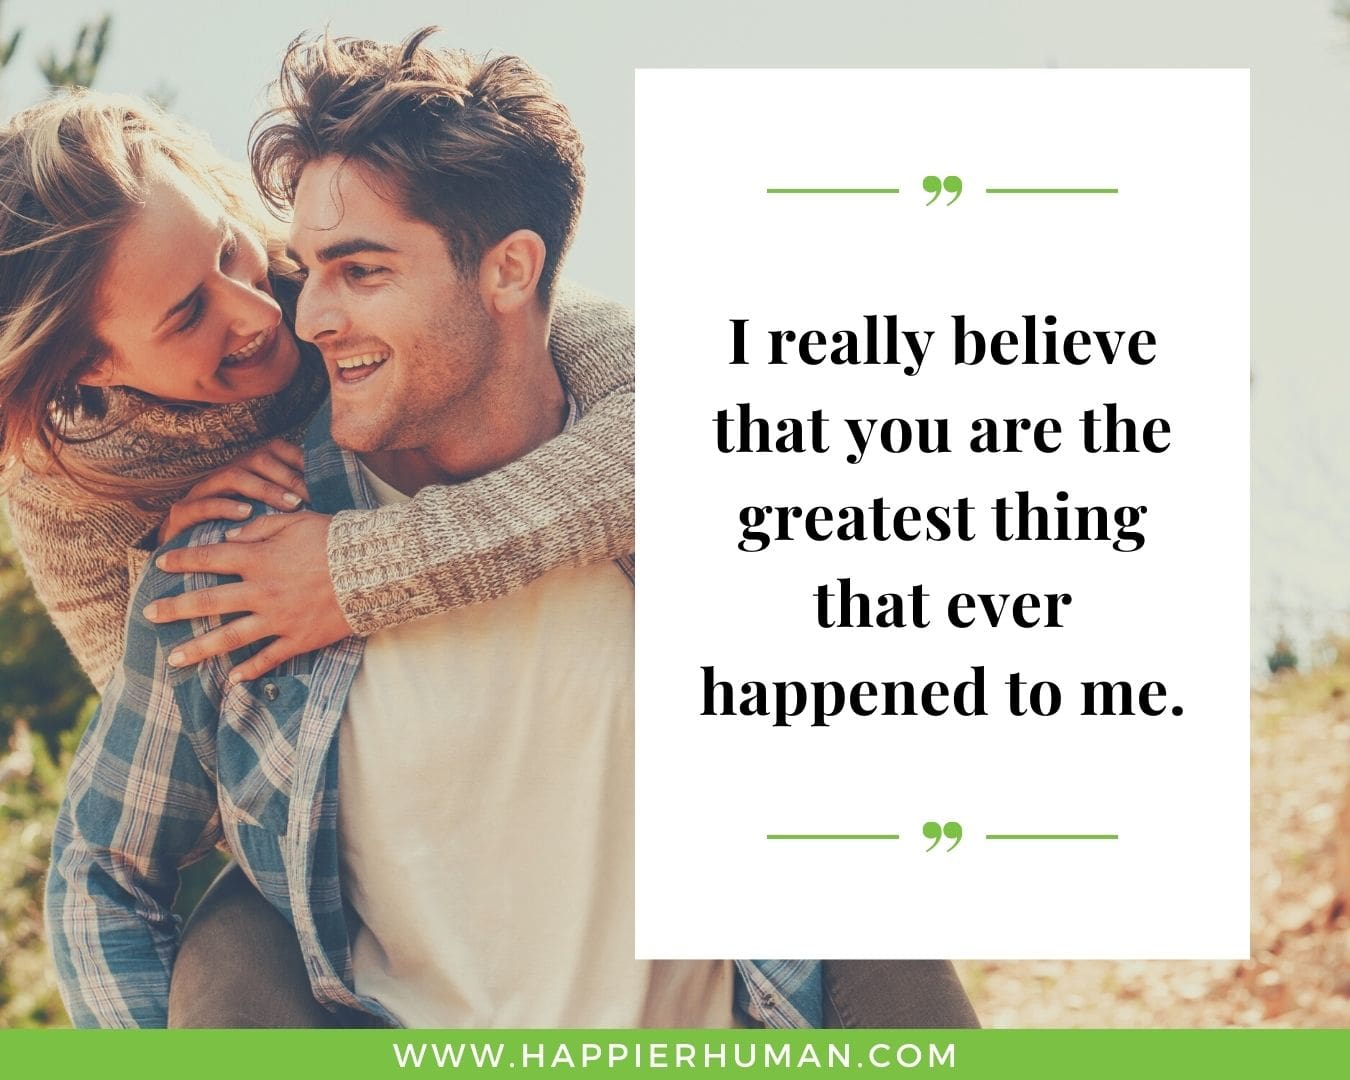 Short, Deep Love Quotes for Her - “I really believe that you are the greatest thing that ever happened to me.”